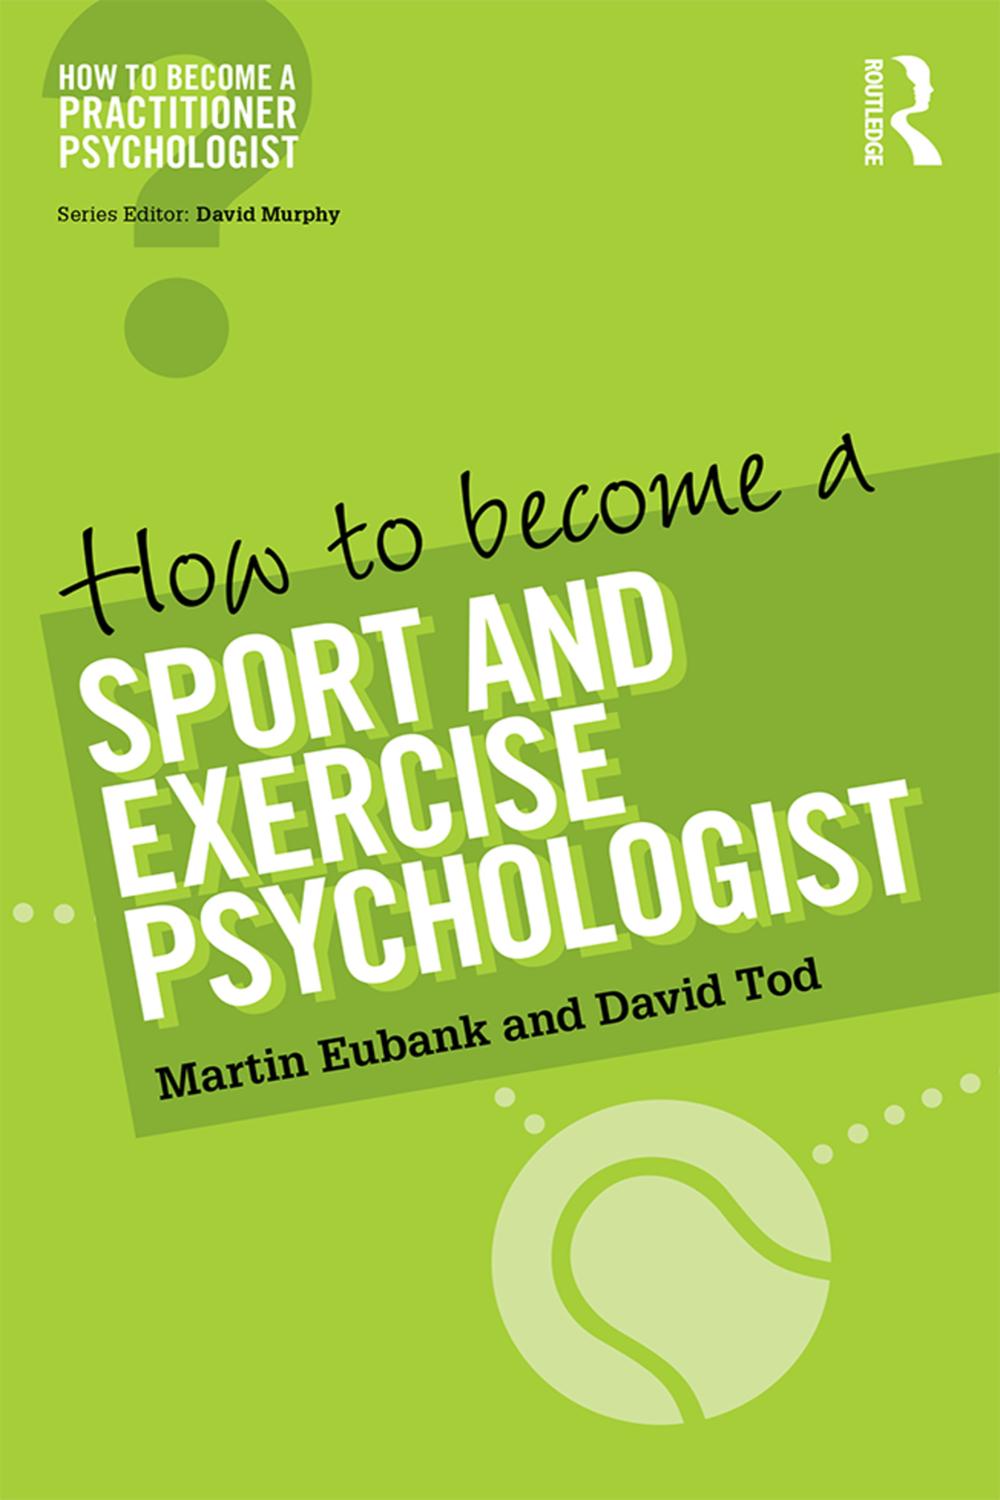 How to Become a Sport and Exercise Psychologist - Martin Eubank, David Tod